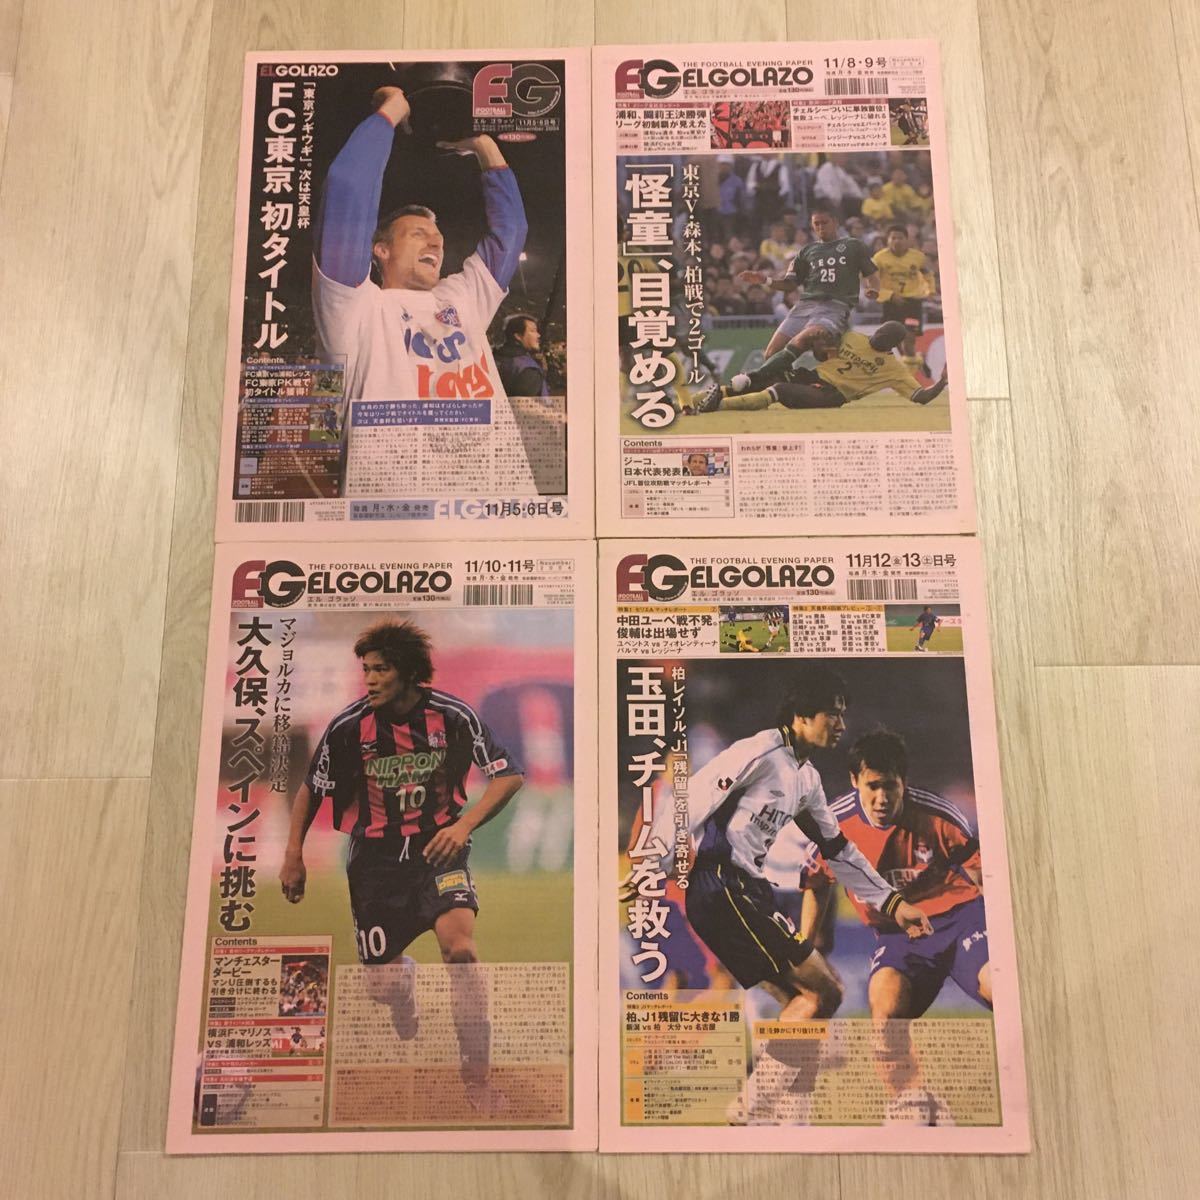 [EL GOLAZO].. number ~101 number. 100 piece set *68 number . coming out . - * L golaso